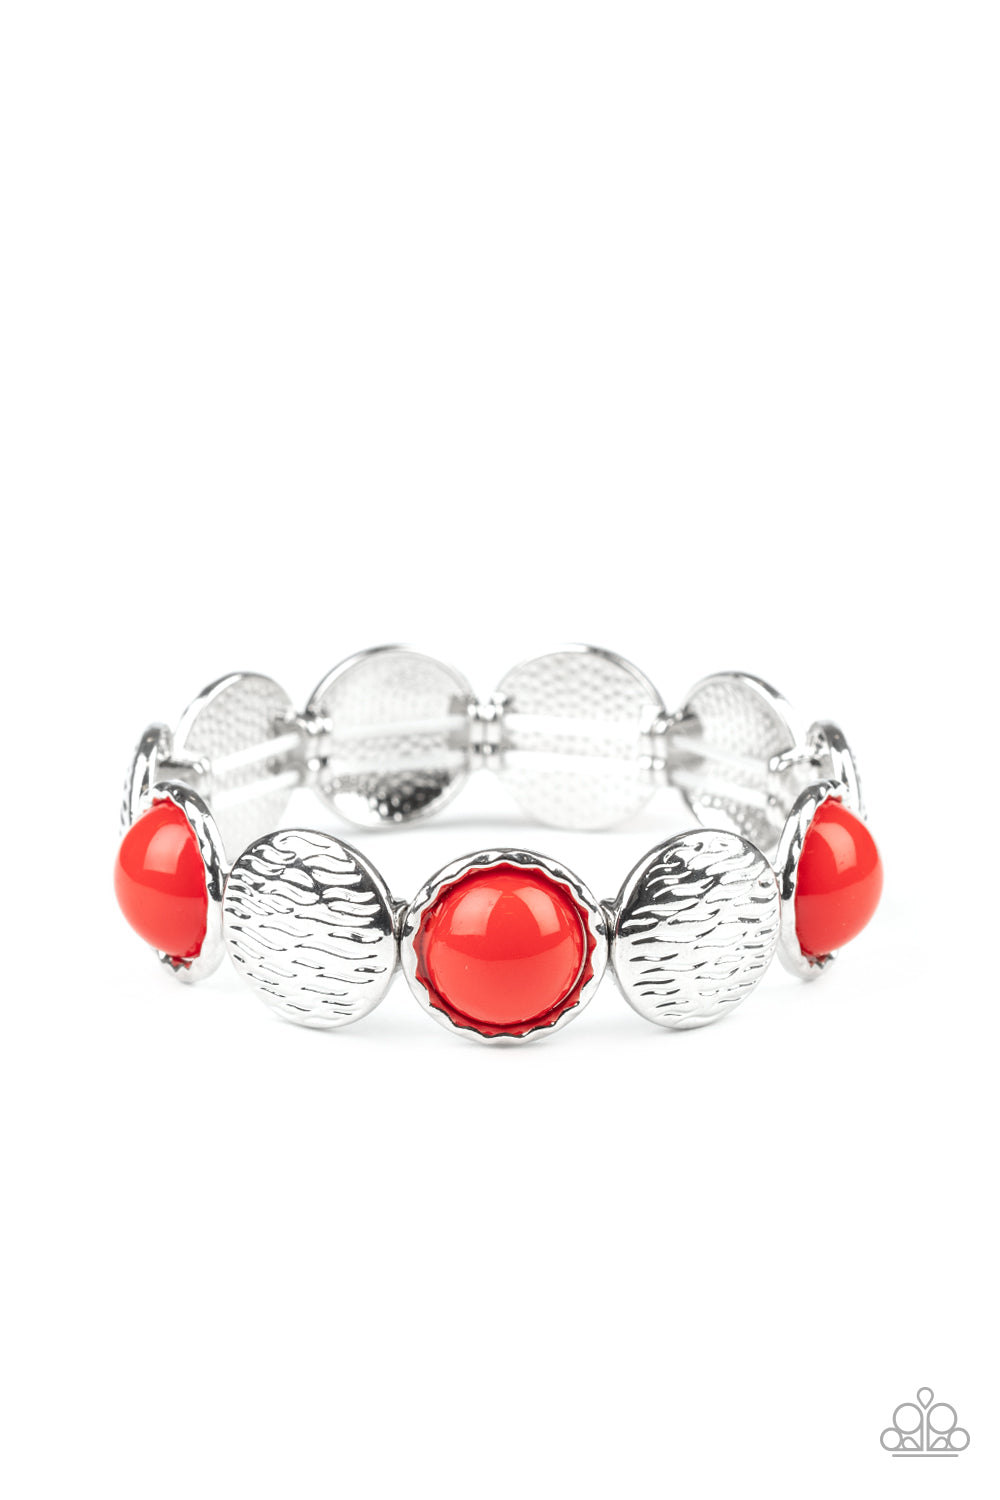 Embossed in wavy textures, shiny silver discs and bubbly red beaded frames are threaded along a stretchy band around the wrist, creating a colorful statement piece.